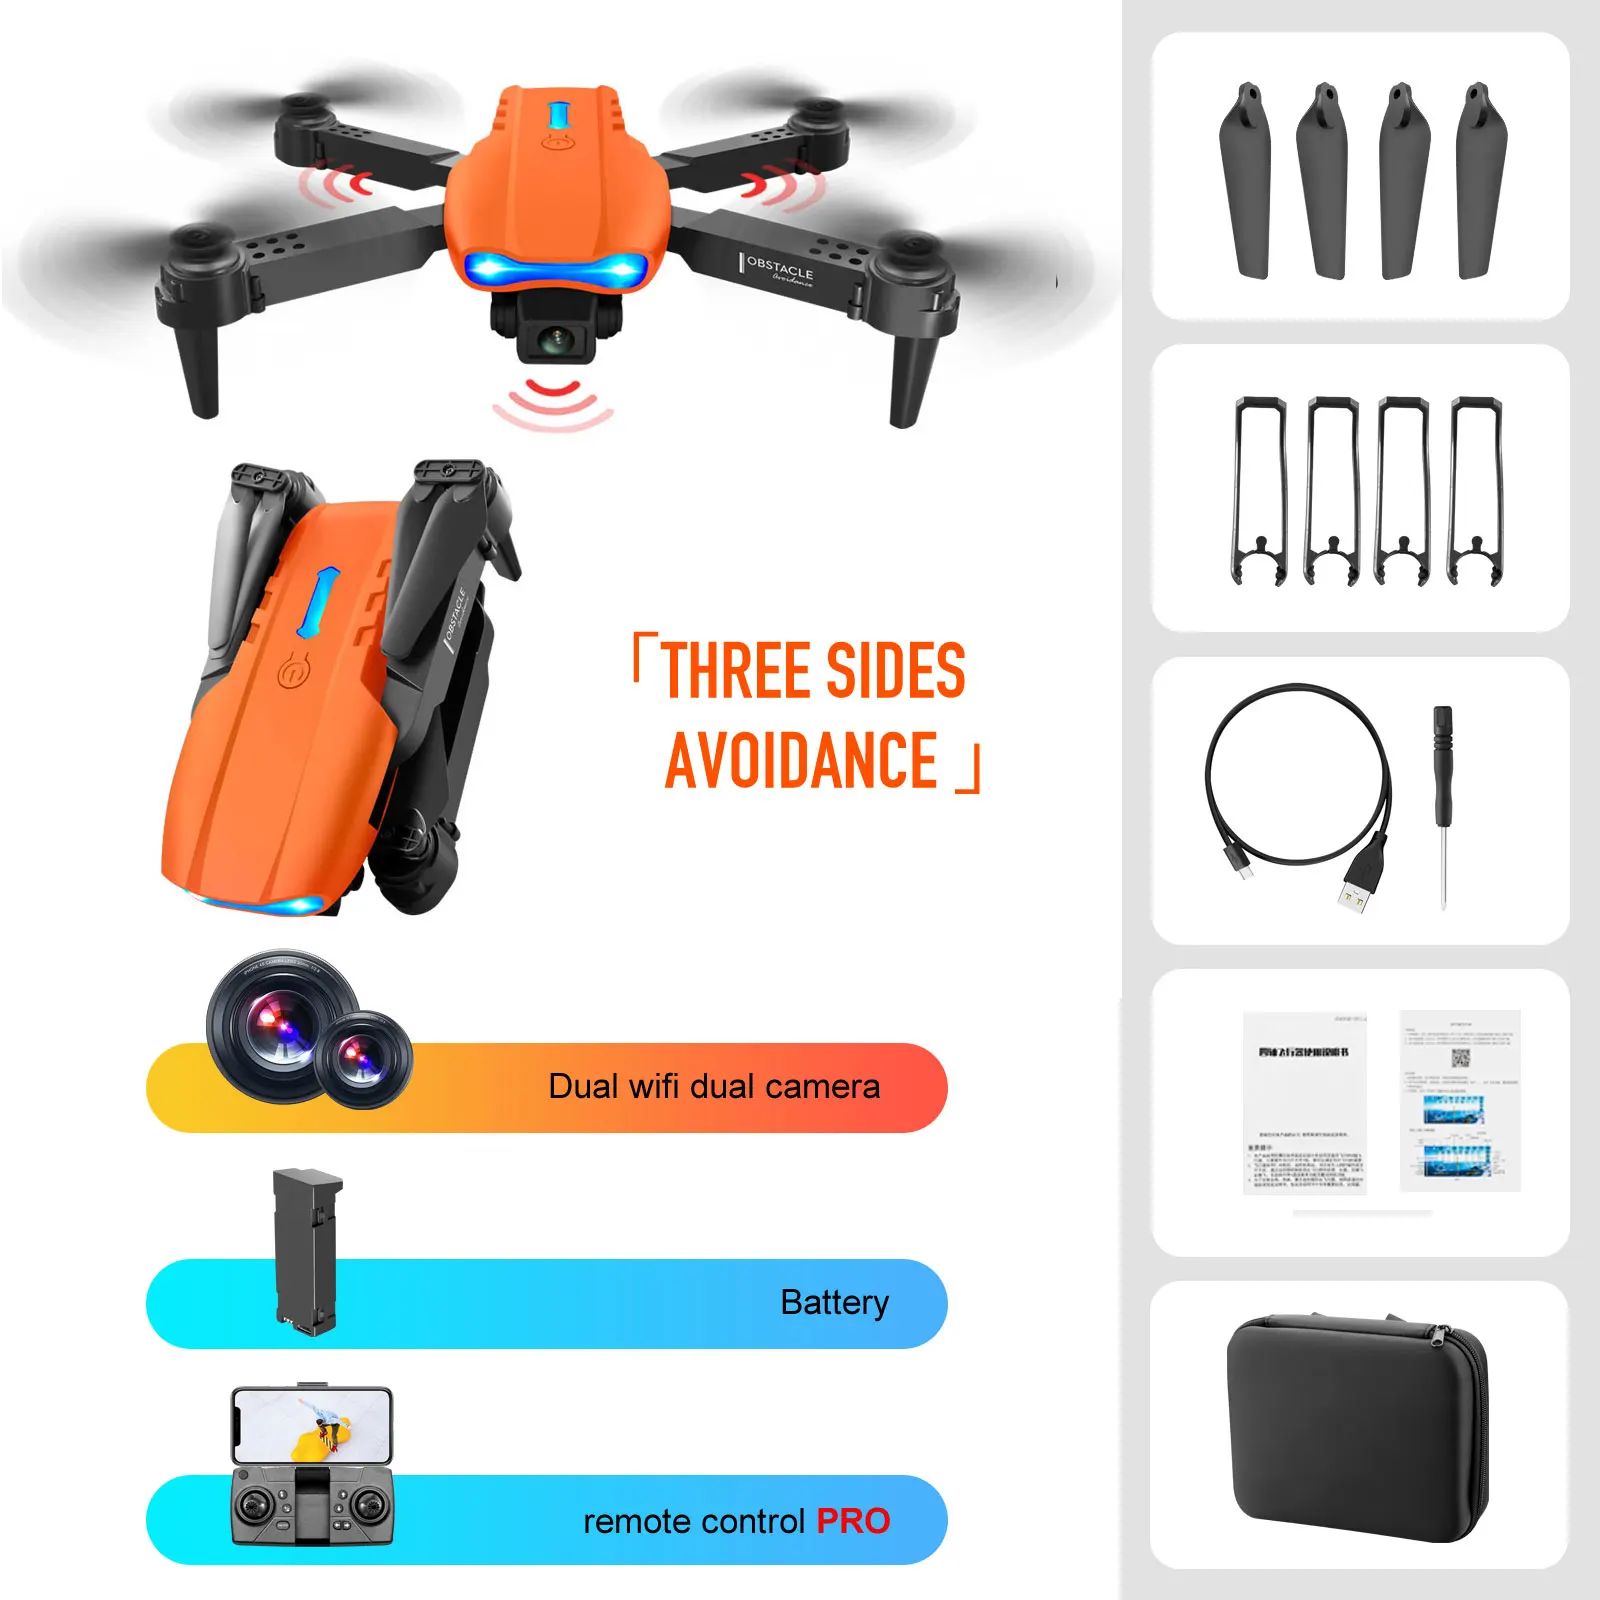 2022 New E99 K3 Drone 4K Dual HD Camera Three Sided Obstacle Avoidance WiFi FPV  Professional Foldable Quadcopter Gifts Toys 6 ch remote control quadcopter RC Quadcopter